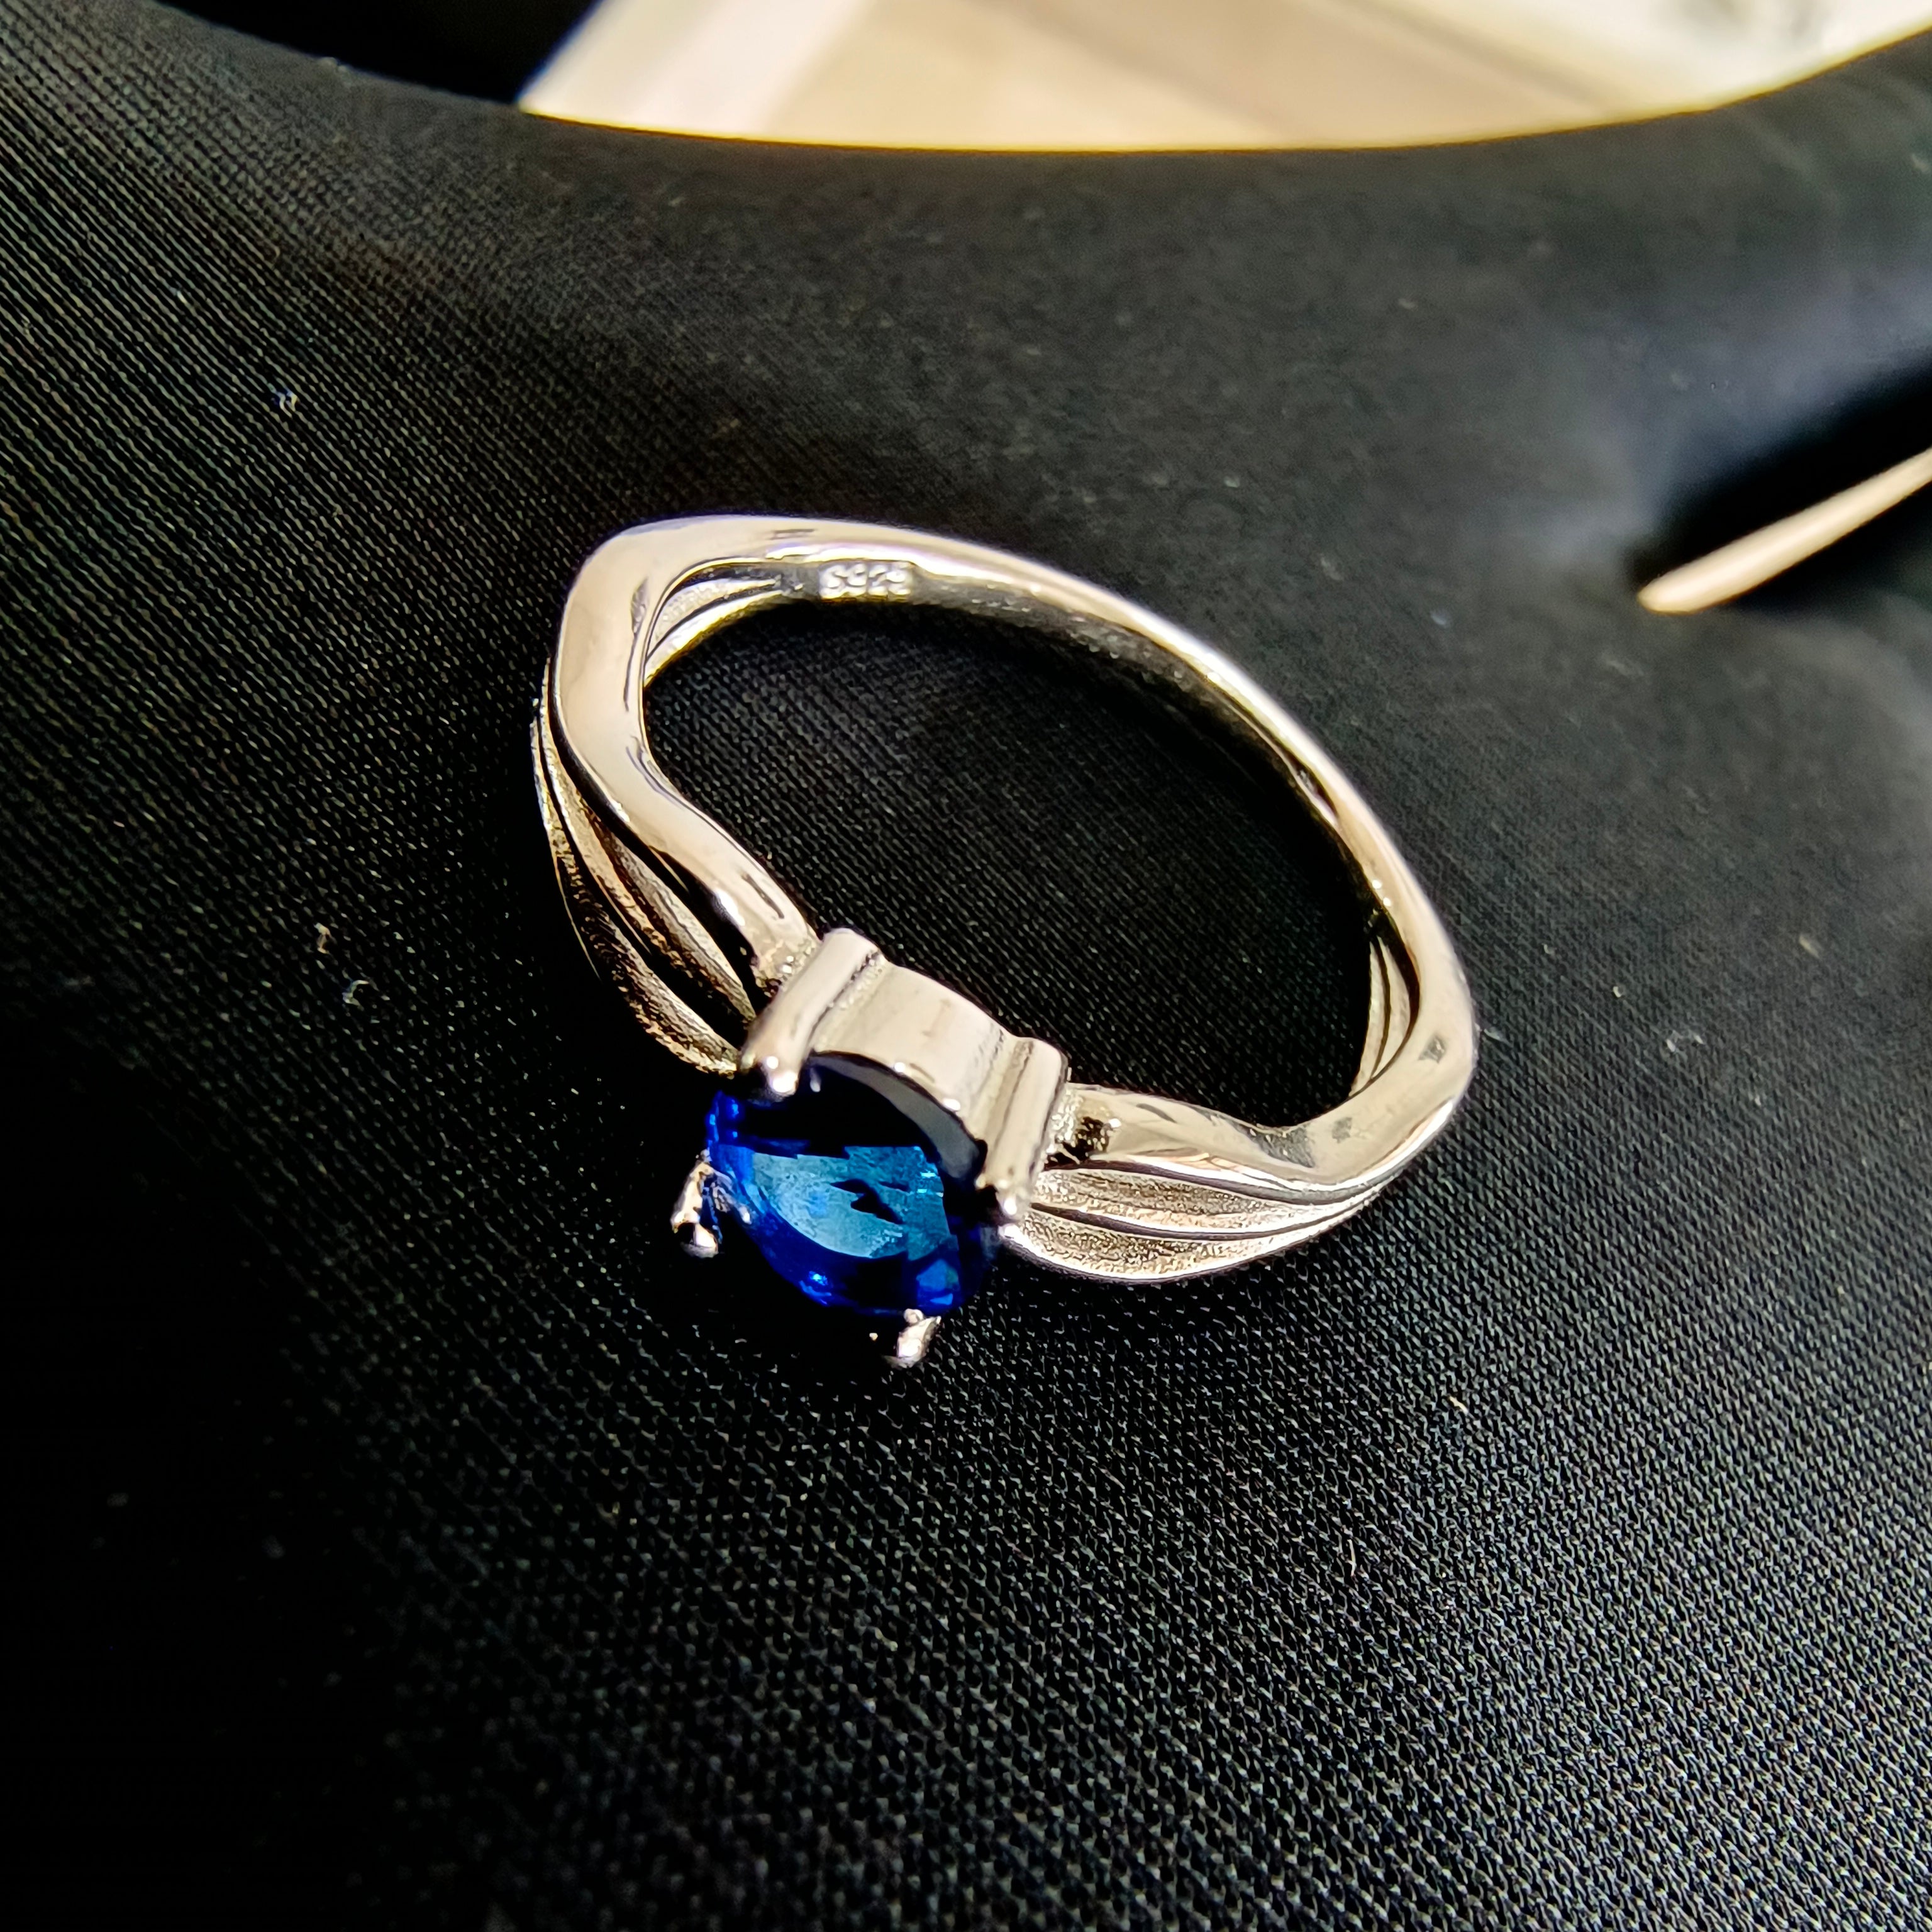 a silver ring with a blue stone on it